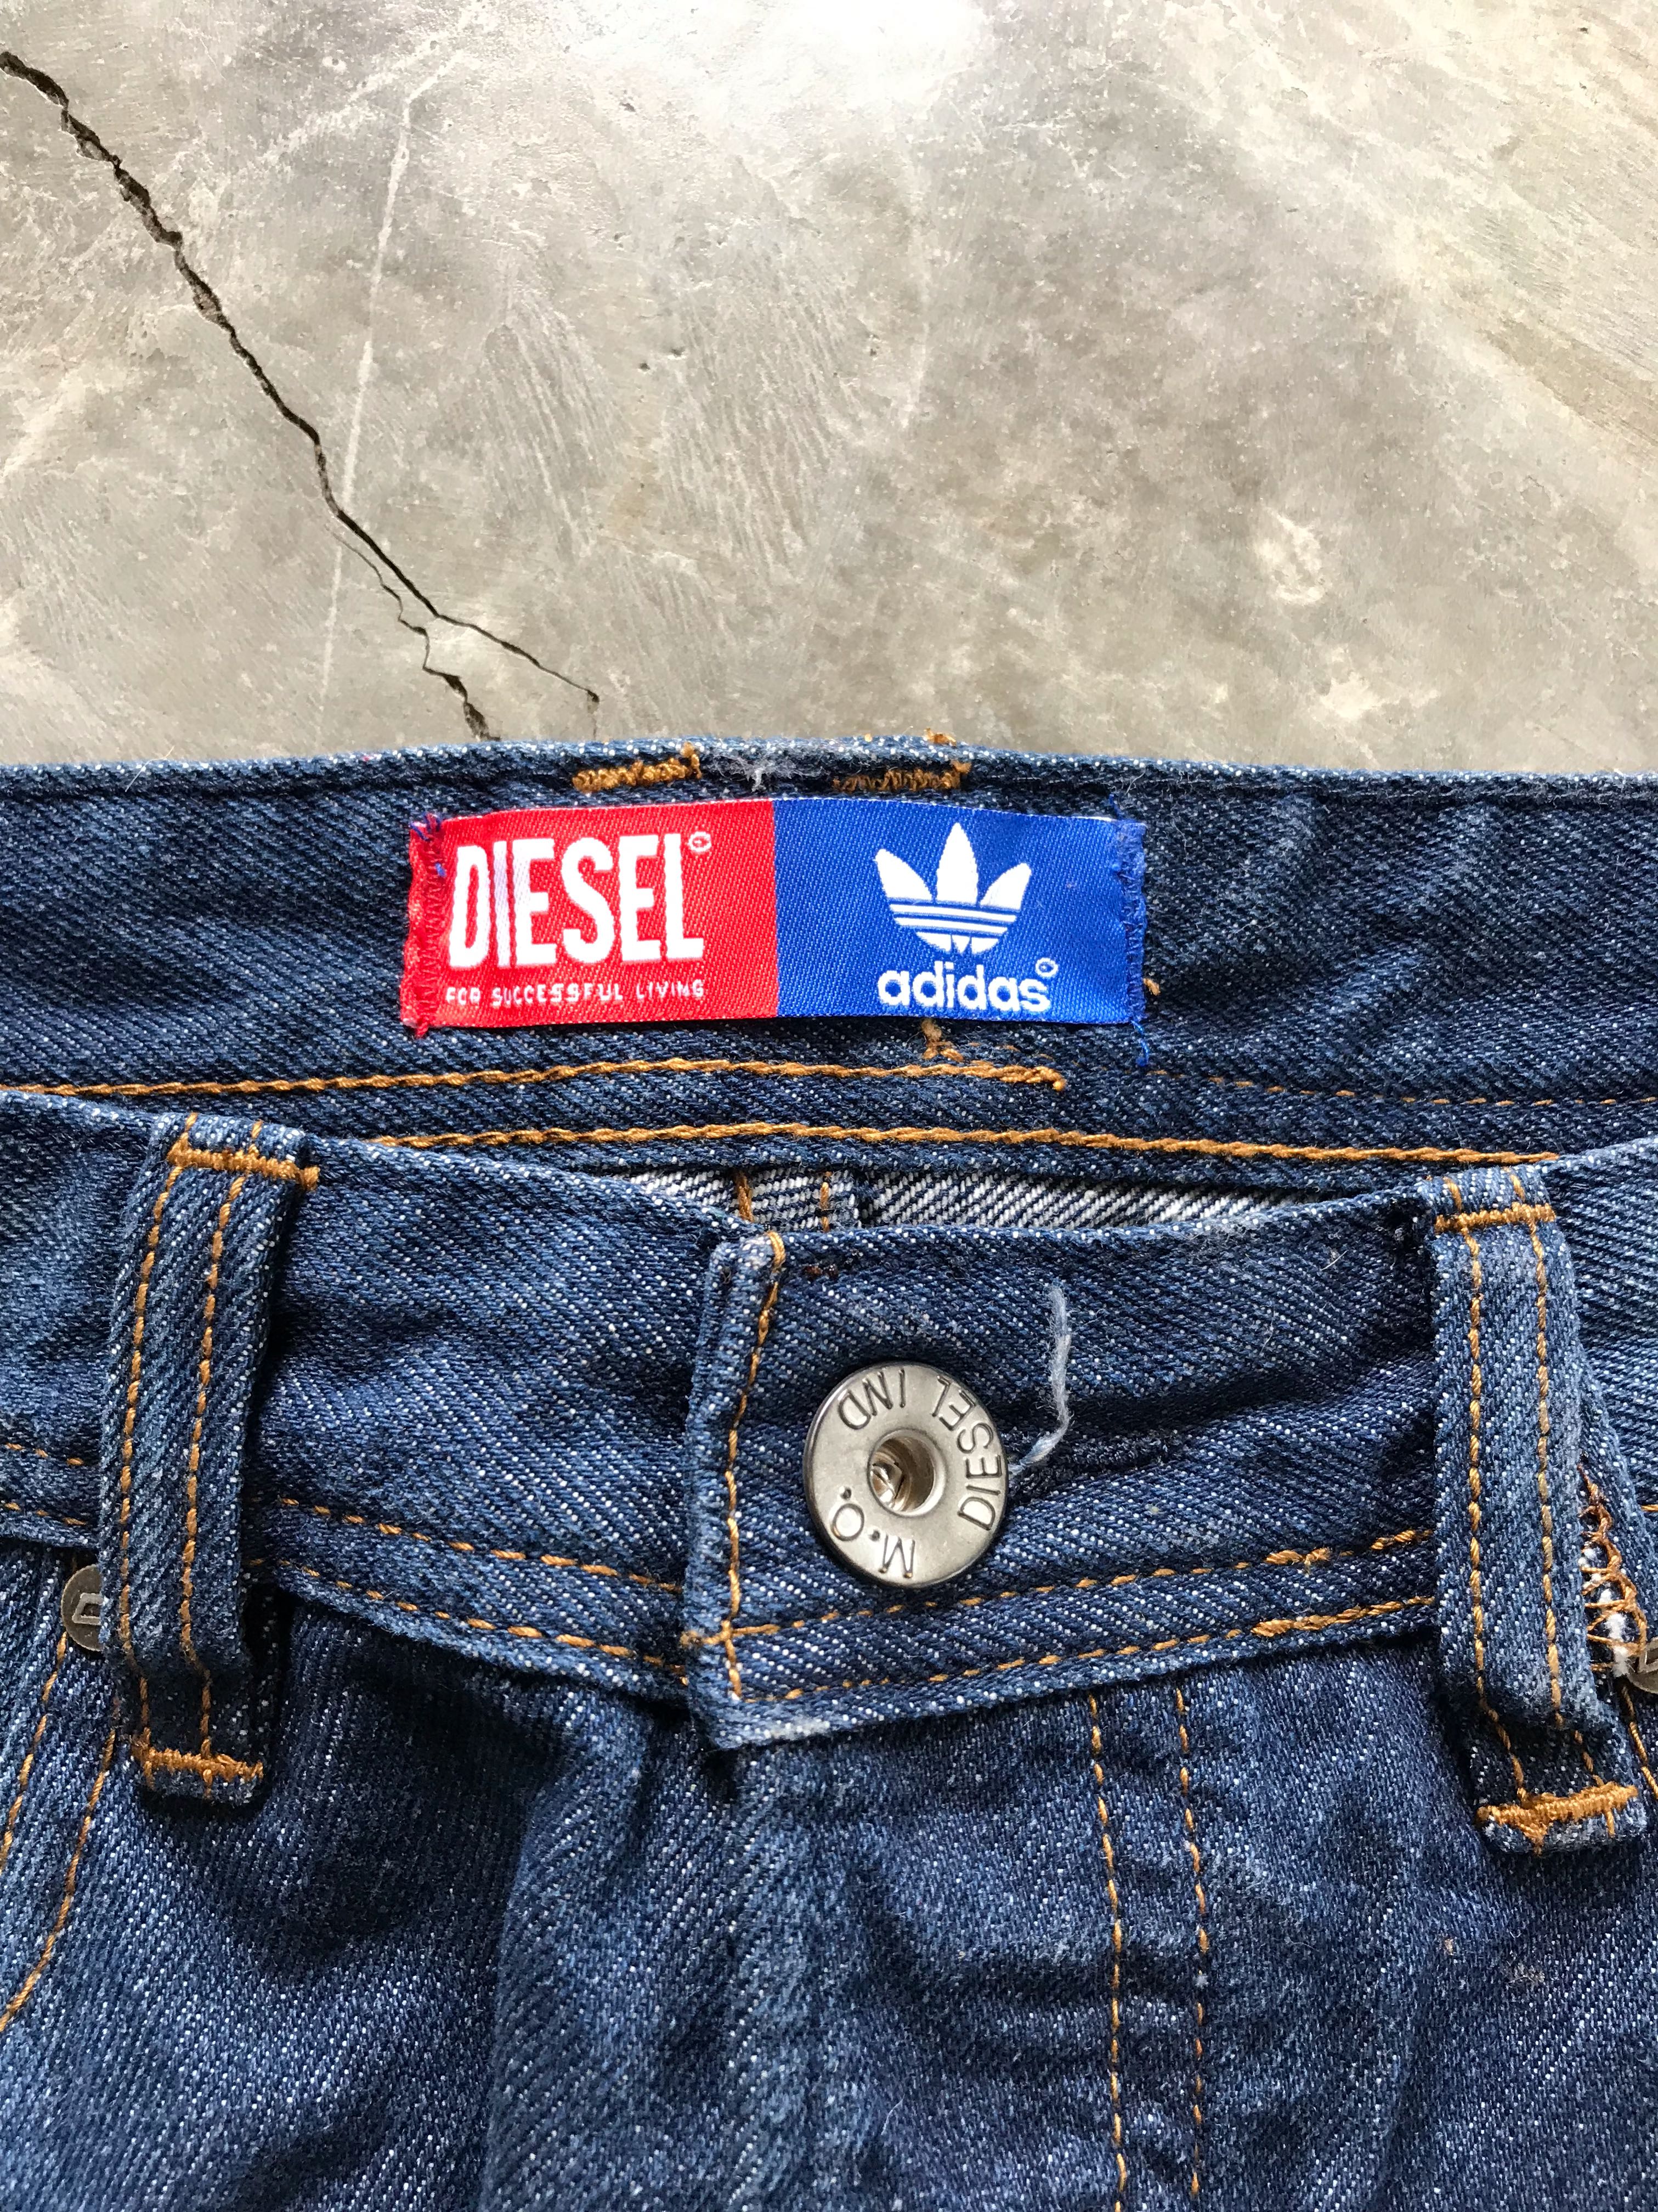 Diesel Adidas pants made in Italy, Men's Fashion, Bottoms, Trousers on Carousell